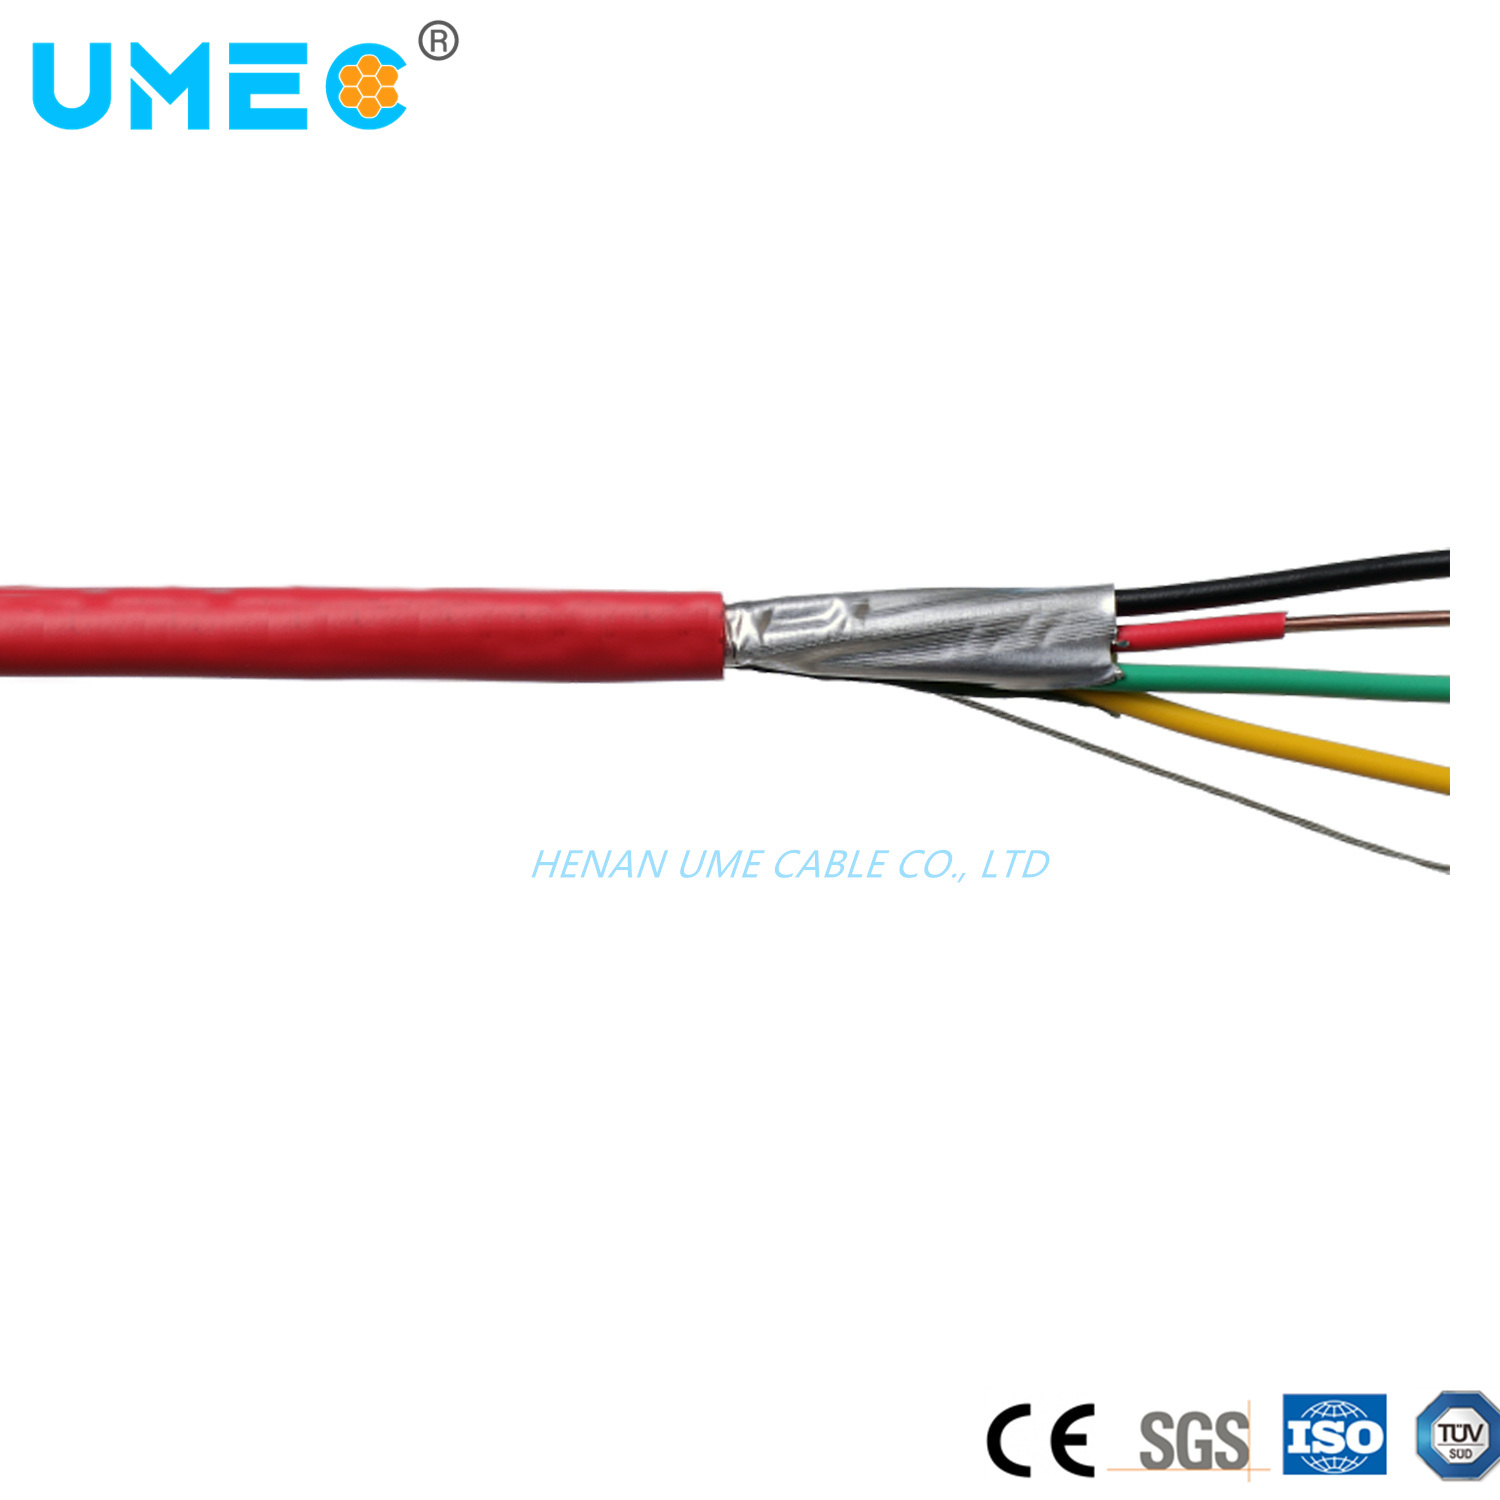 Monitoring/Detection for Fire Alarm Systems Cable 2cx7/0.20mm Copper Cable Alarm Cable Wire